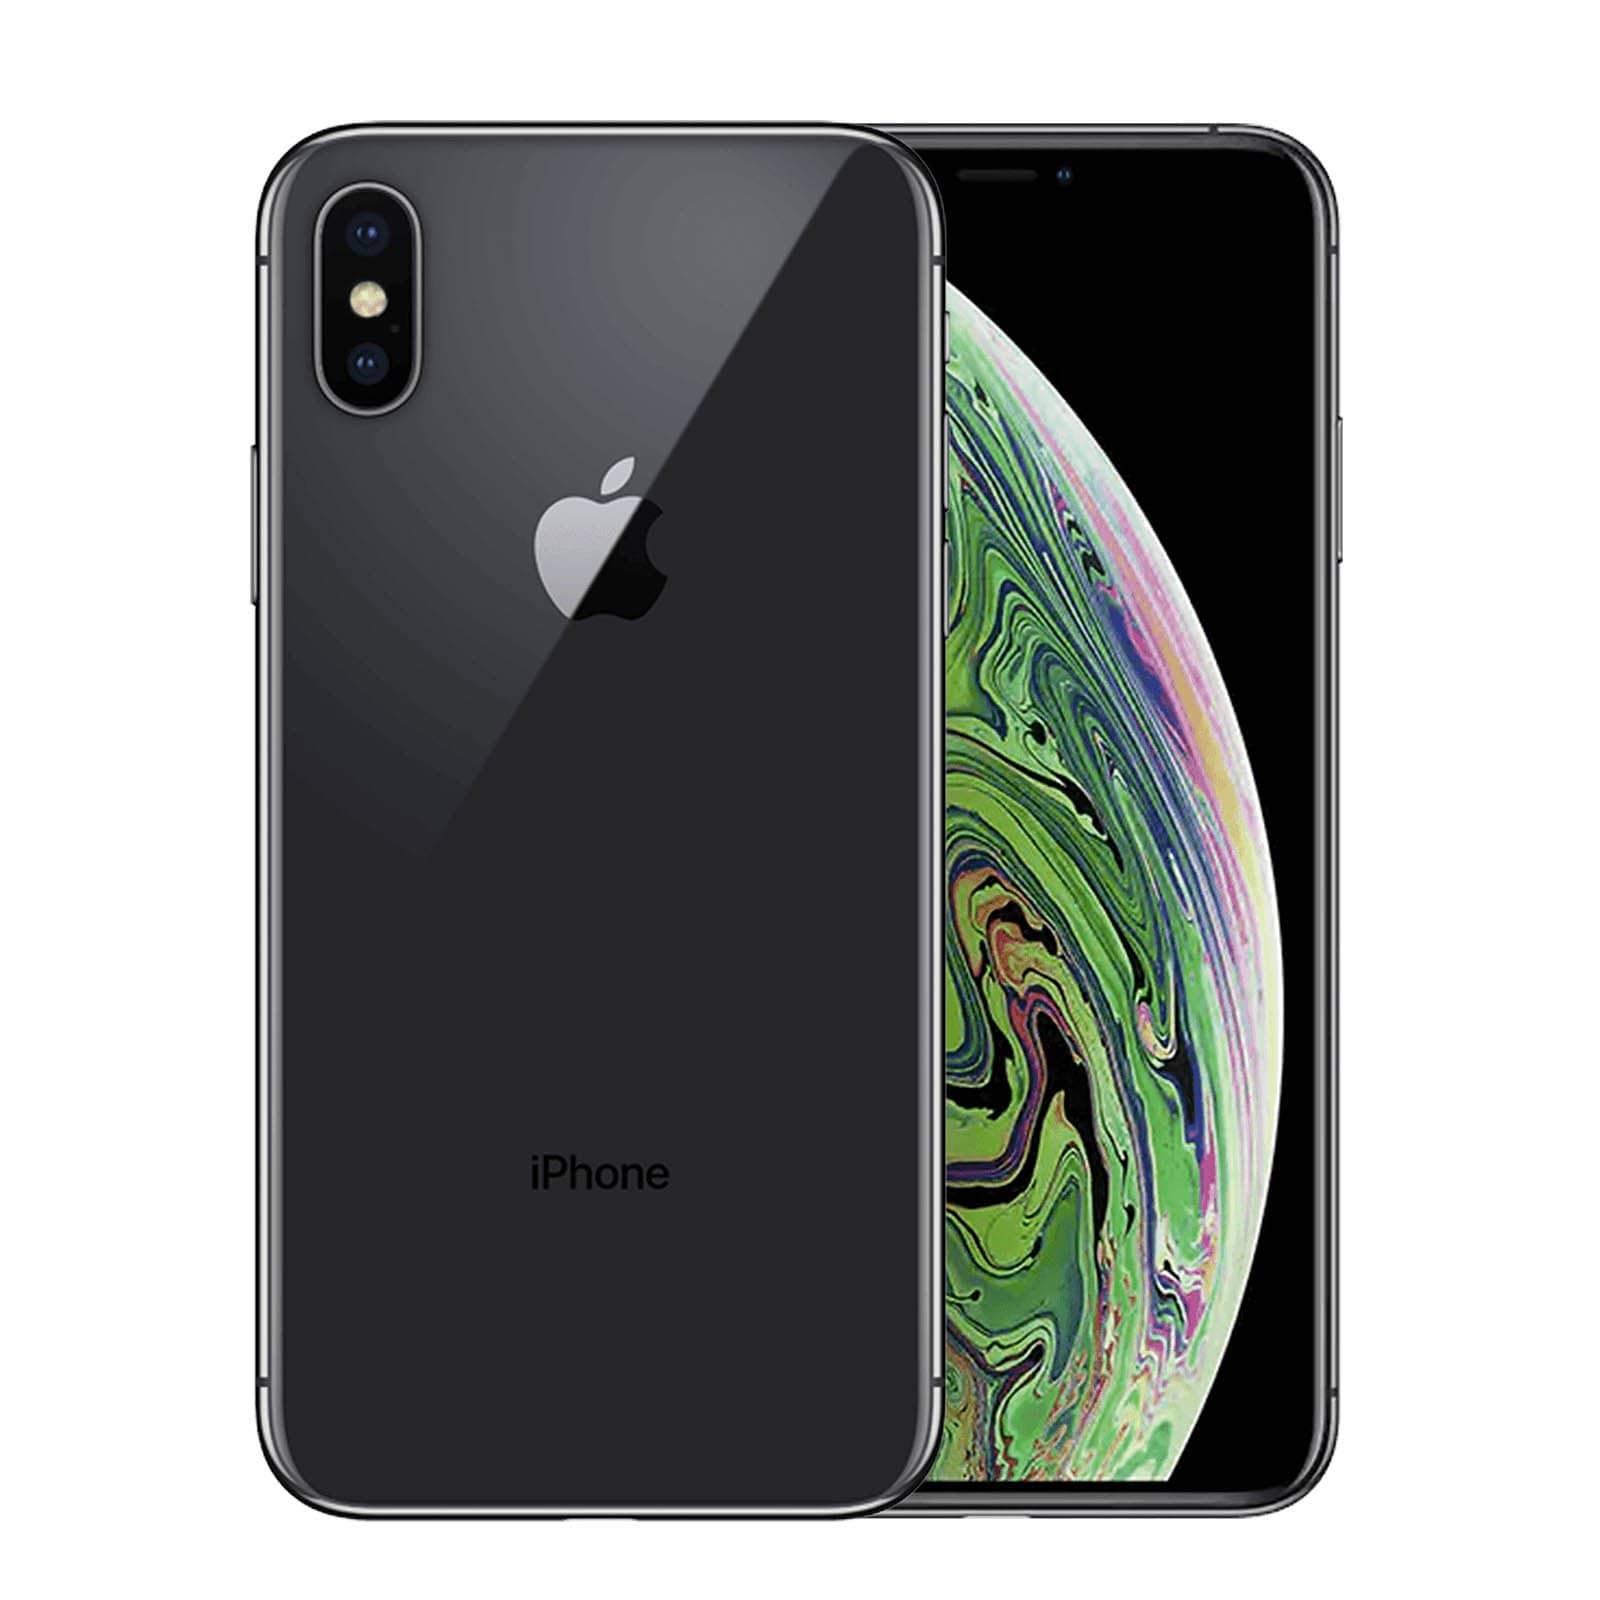 Apple iPhone XS Max 256GB Space Grey Very Good - Unlocked 256GB Space Grey Very Good